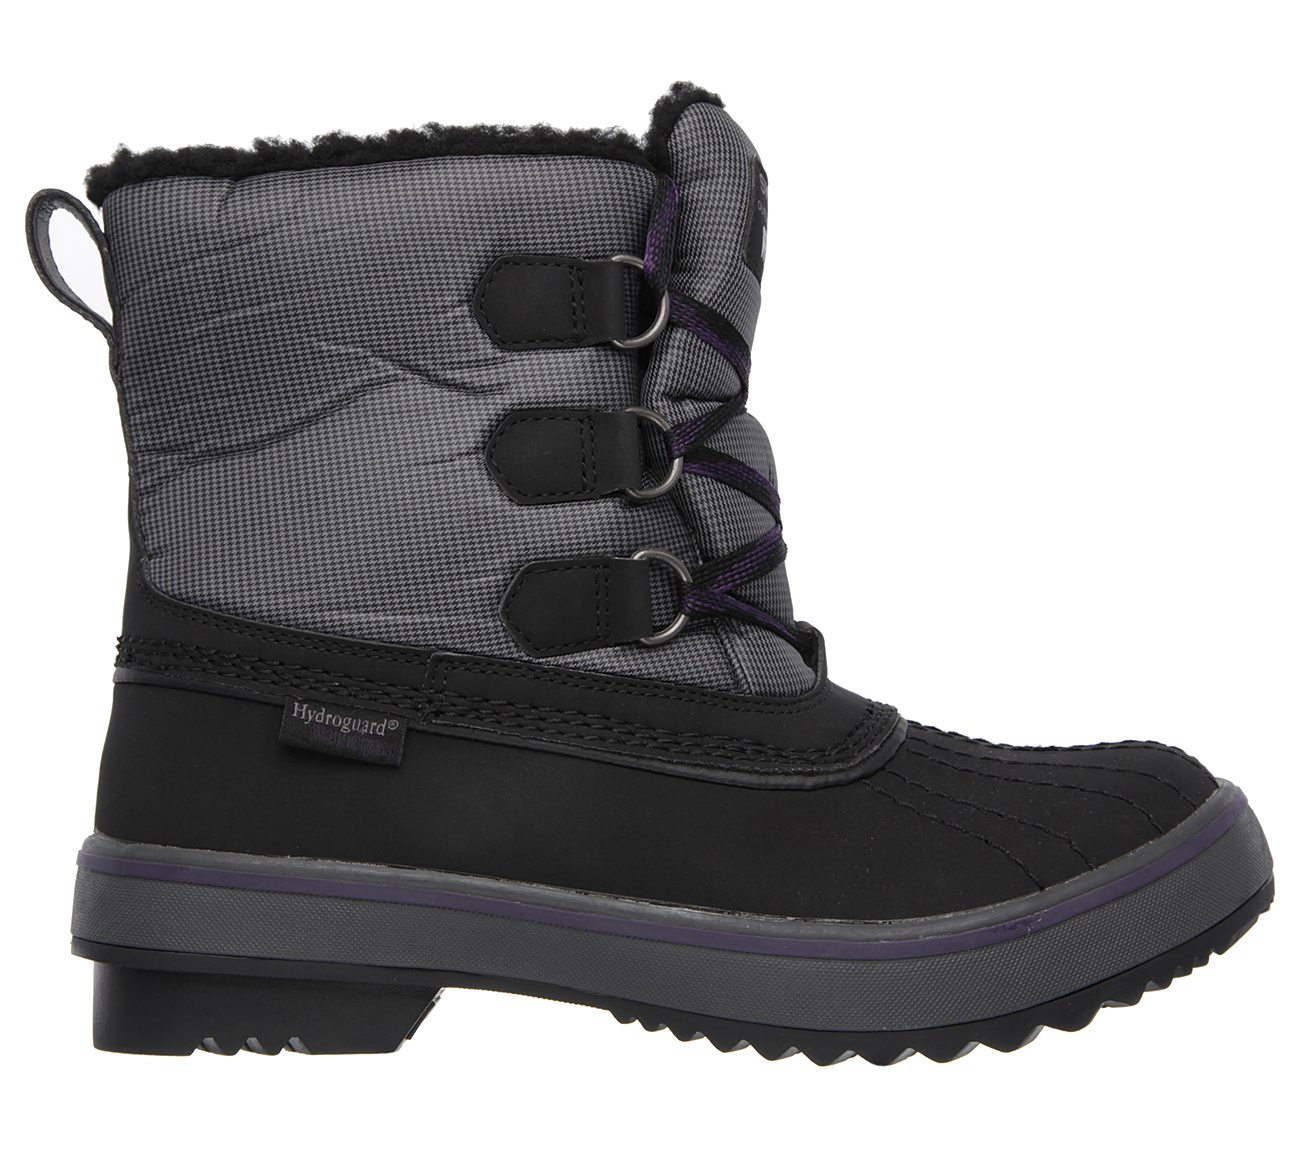 skechers woodland snow boots Sale,up to 